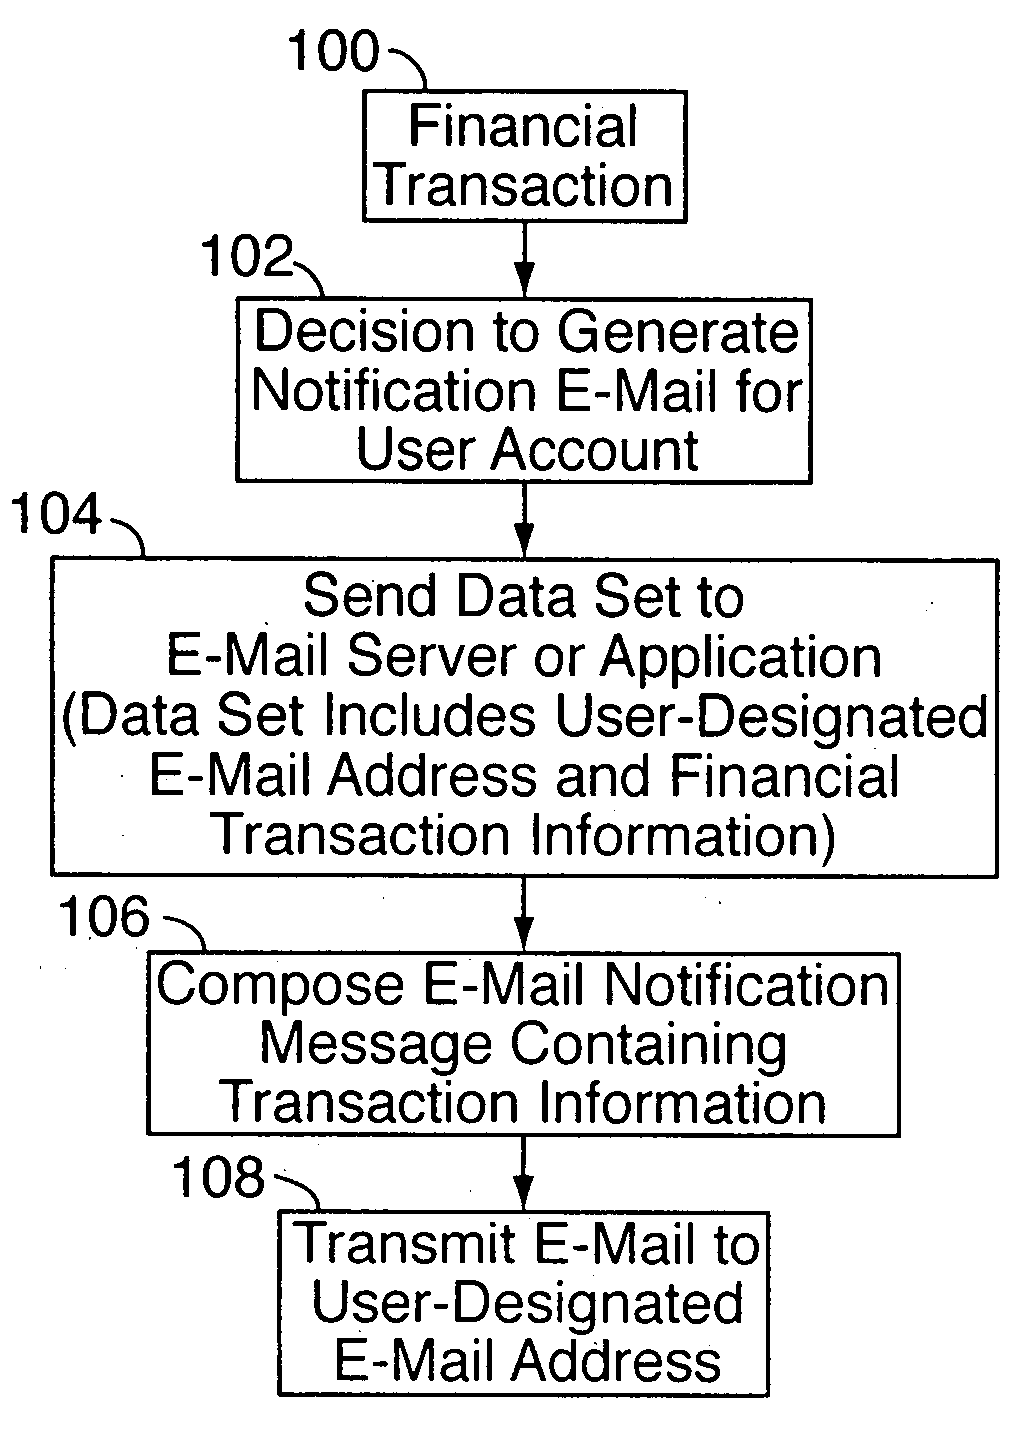 System for automatic financial transaction notifications over wireless network or other network